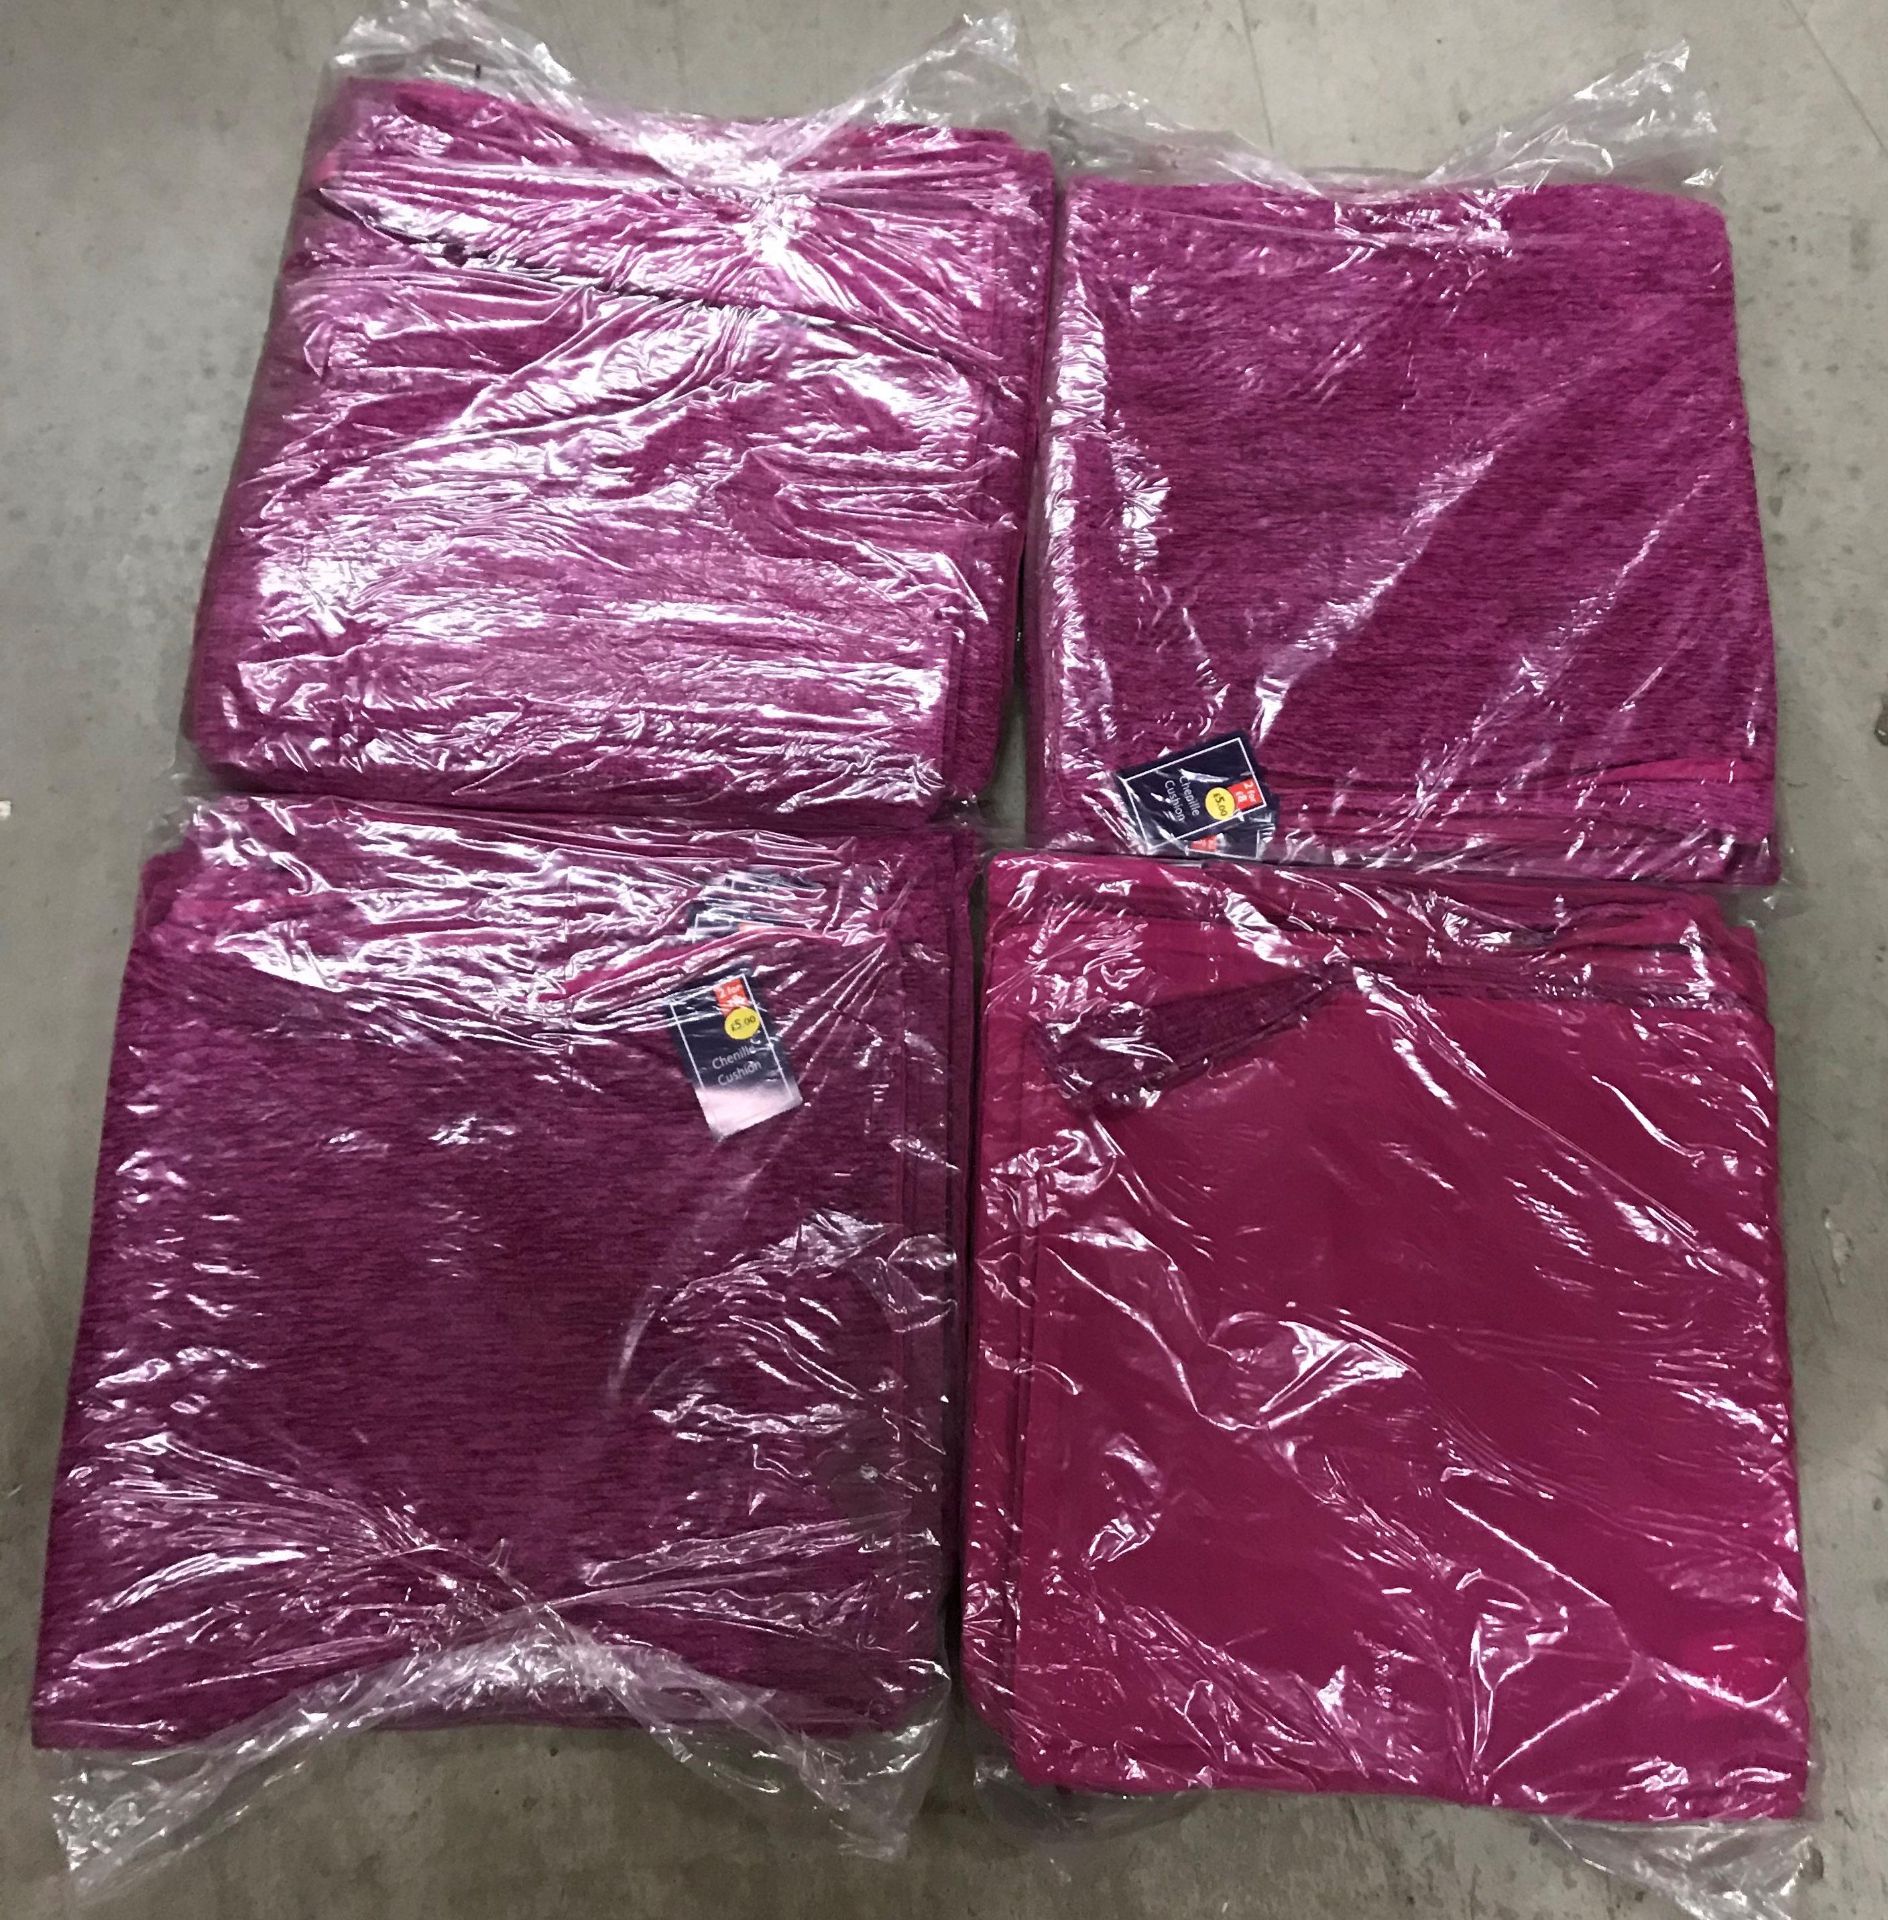 4 x packs of 8 chenille cushion covers in plum - 40 x 40cm - Image 2 of 3